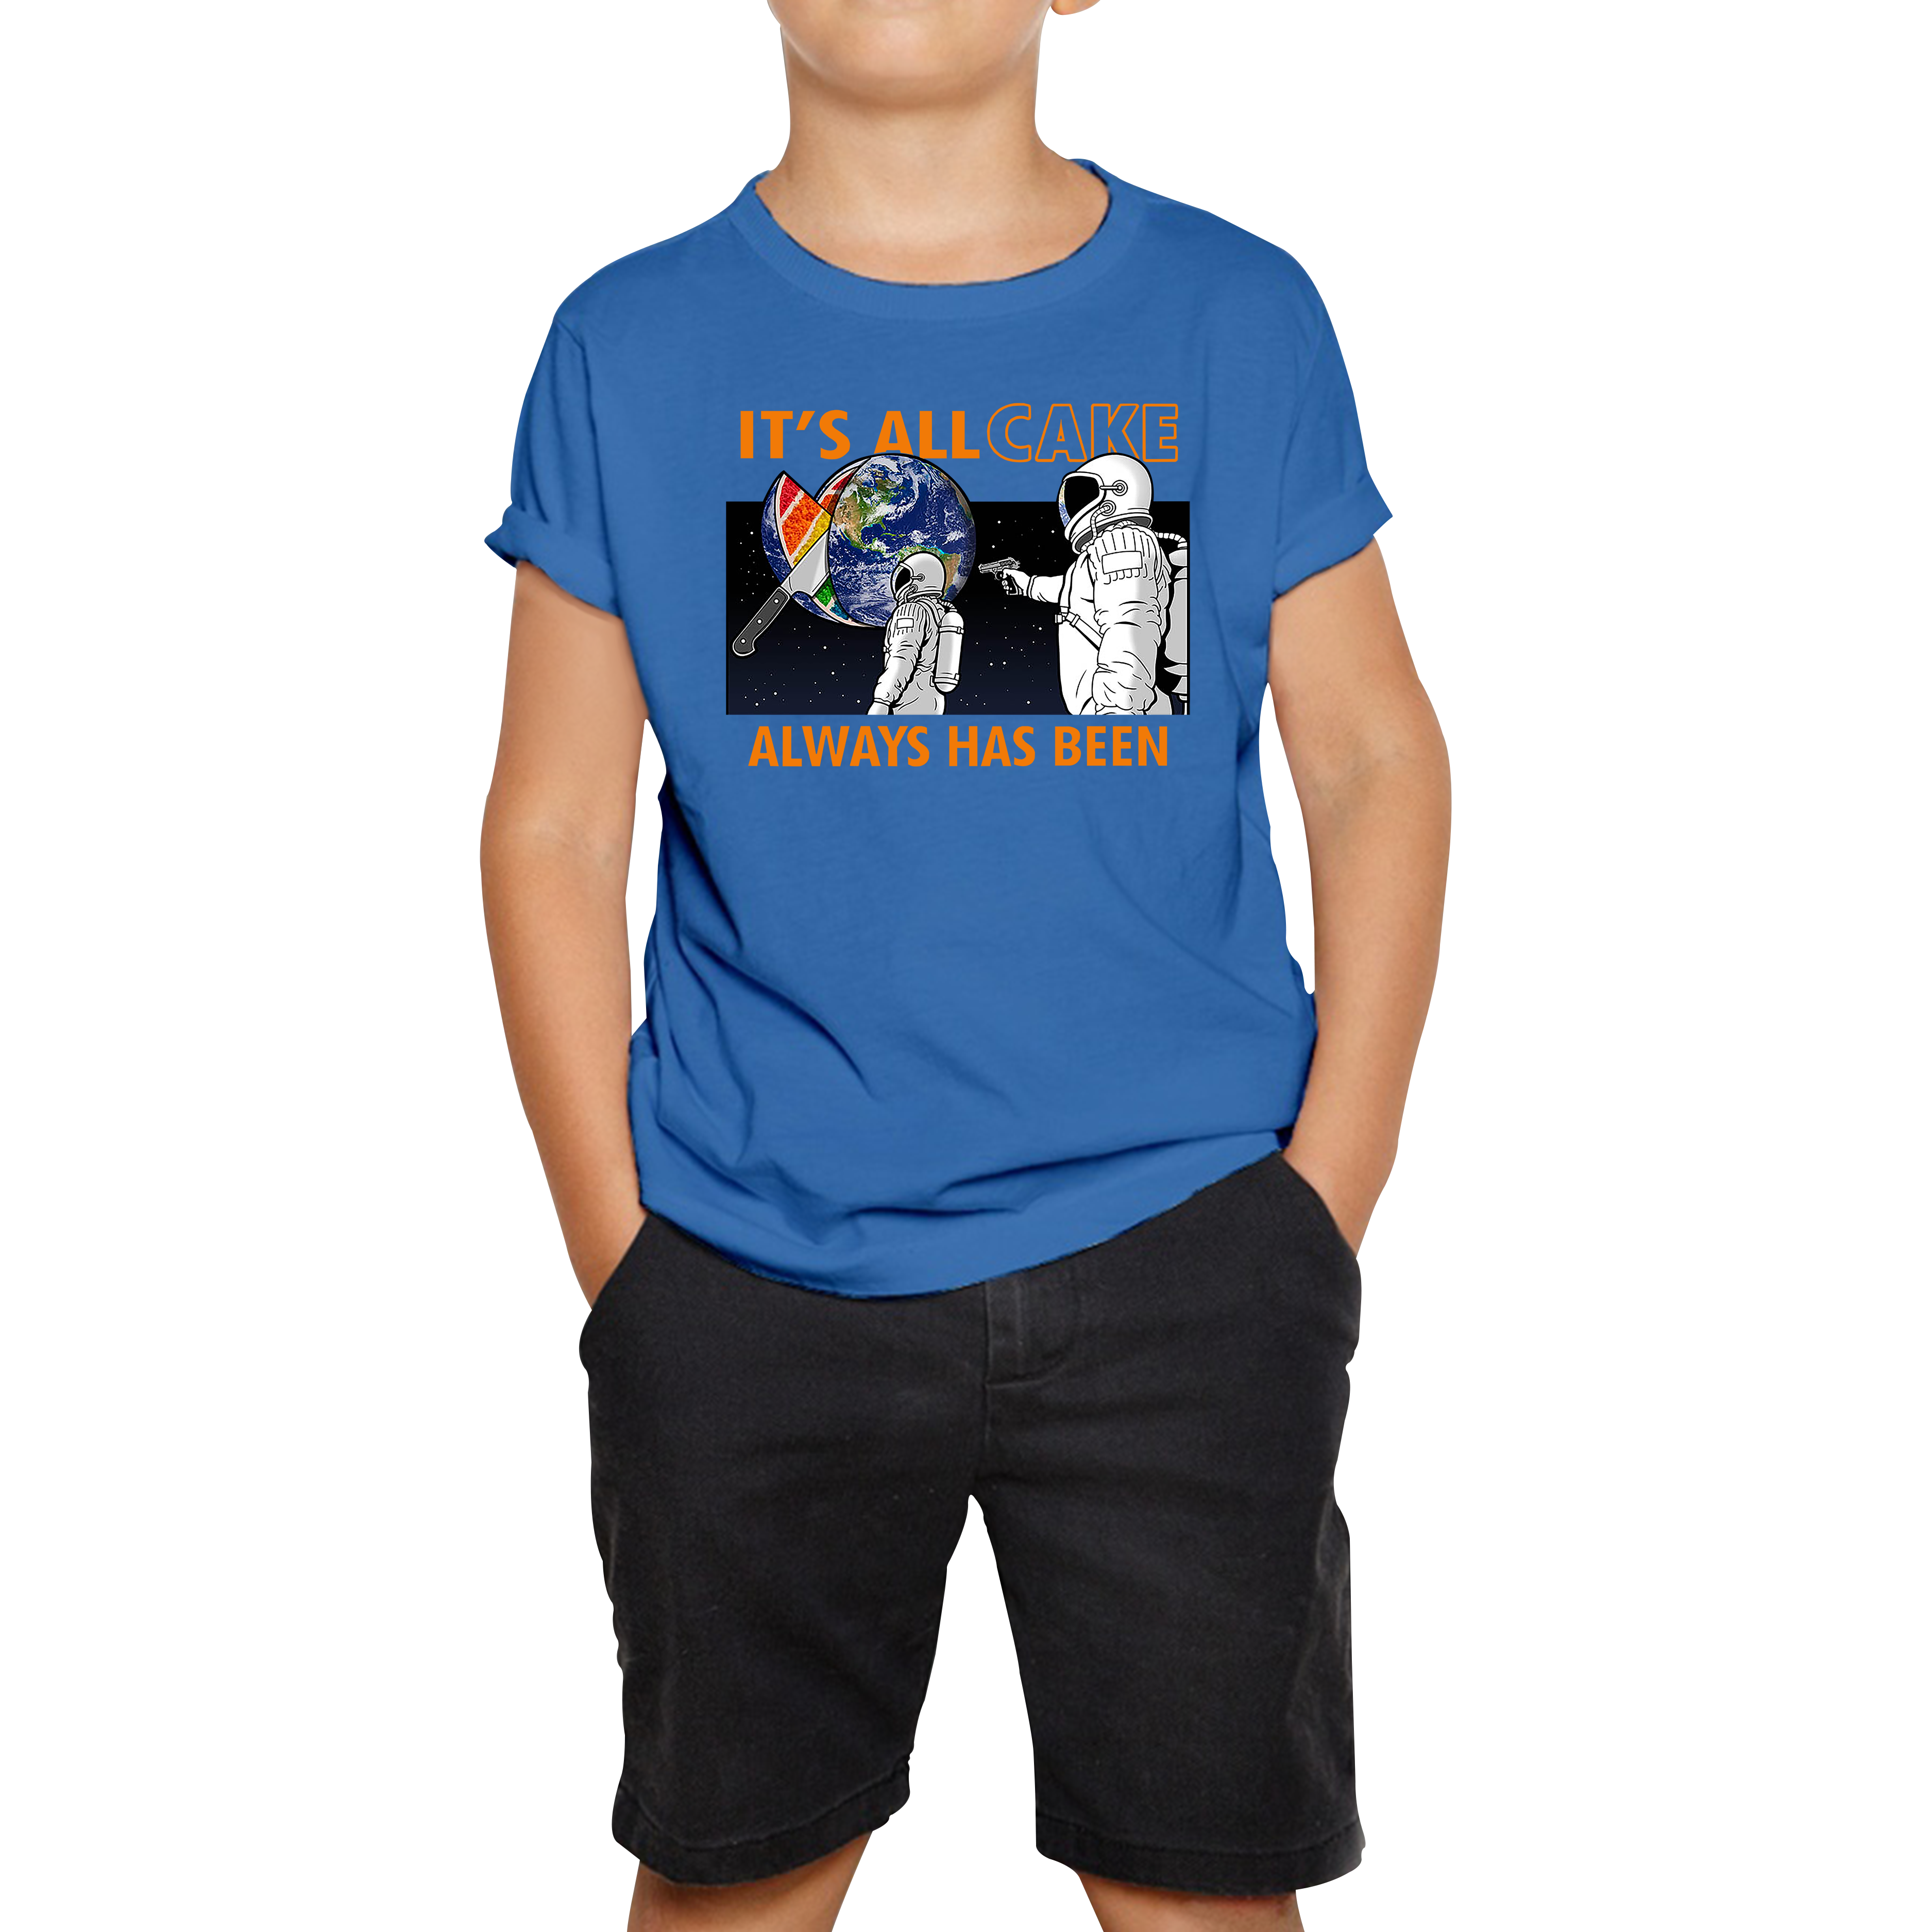 It's All Cake (Always Has Been) Astronaut Space Picture Funny Saying Novelty Meme Kids T Shirt